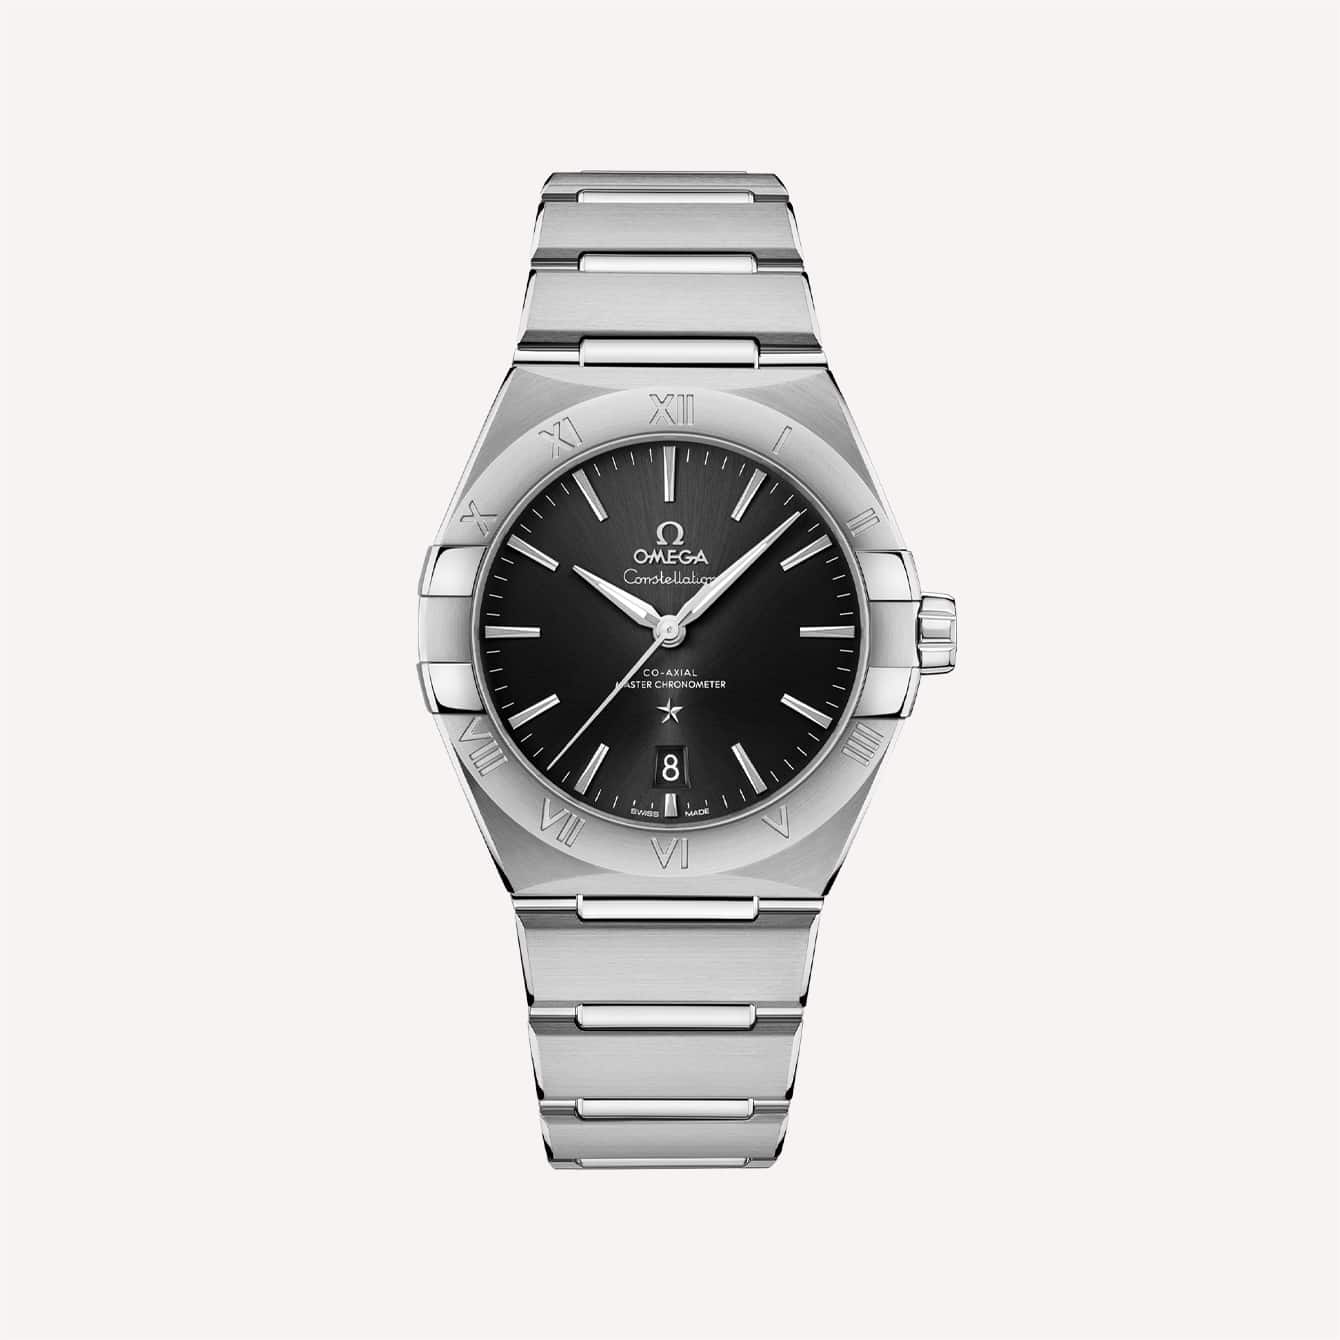 Omega Constellation Co Axial Chronometer Watch